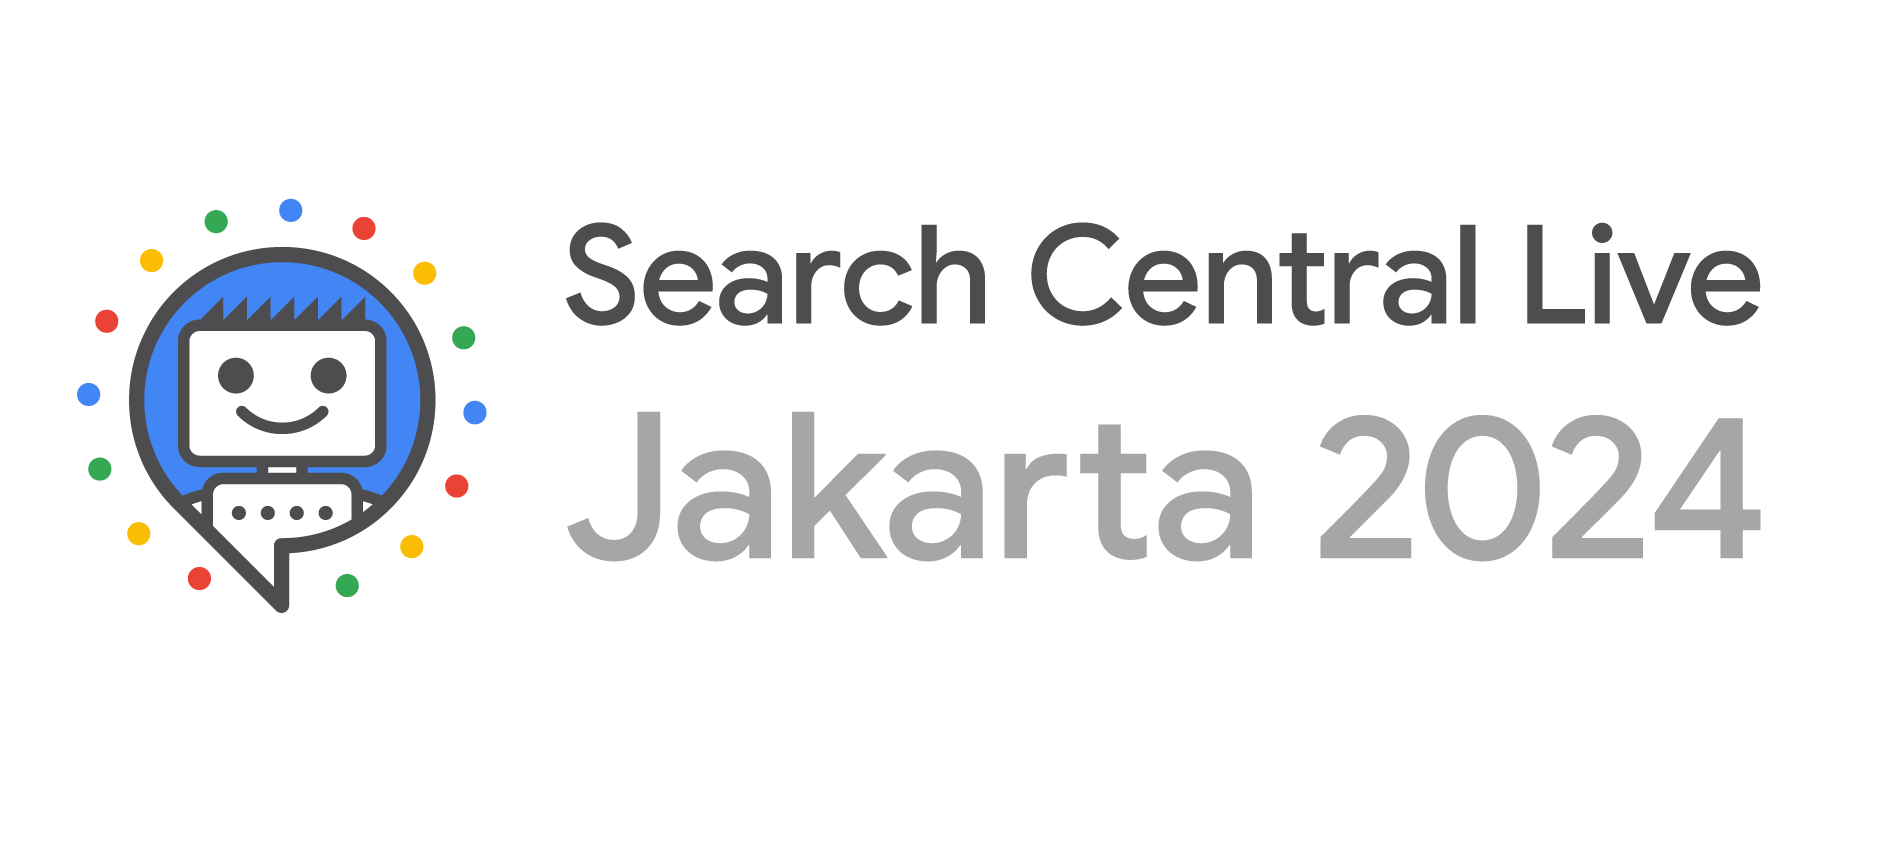 Search Central Live: Yakarta 2024